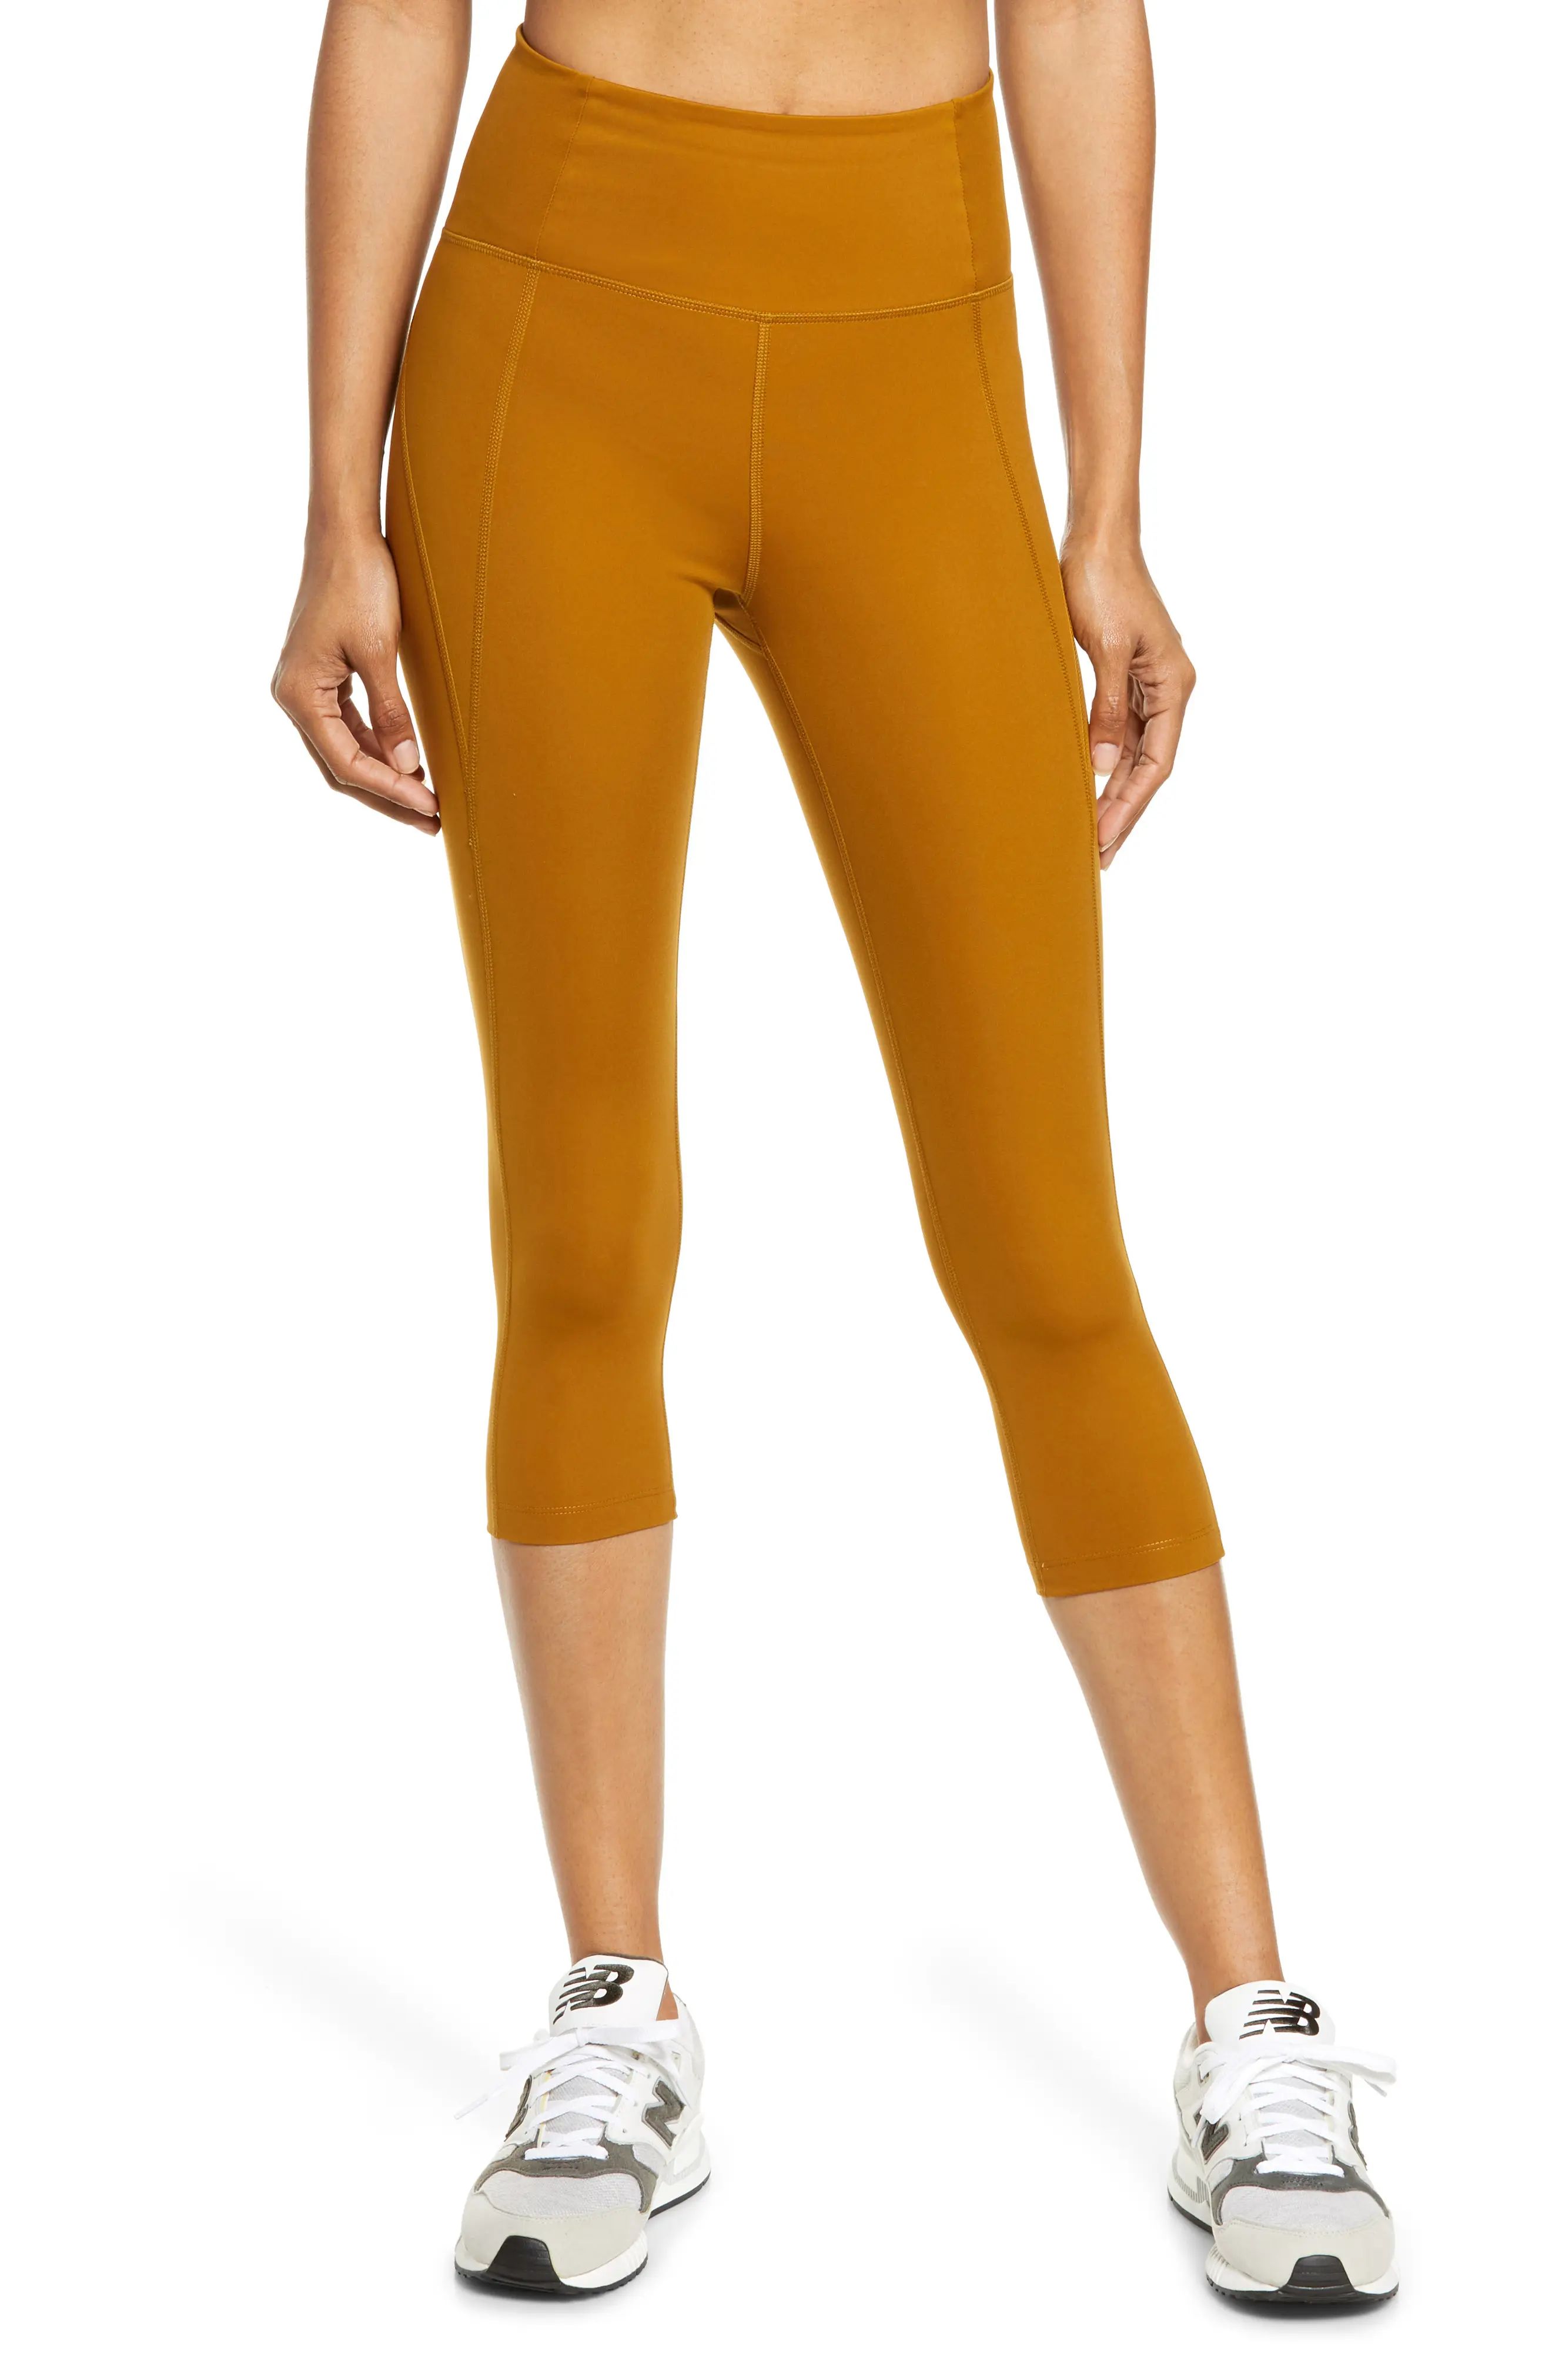 Girlfriend Collective High Waist Capri Leggings, Size X-Large in Saddle at Nordstrom | Nordstrom